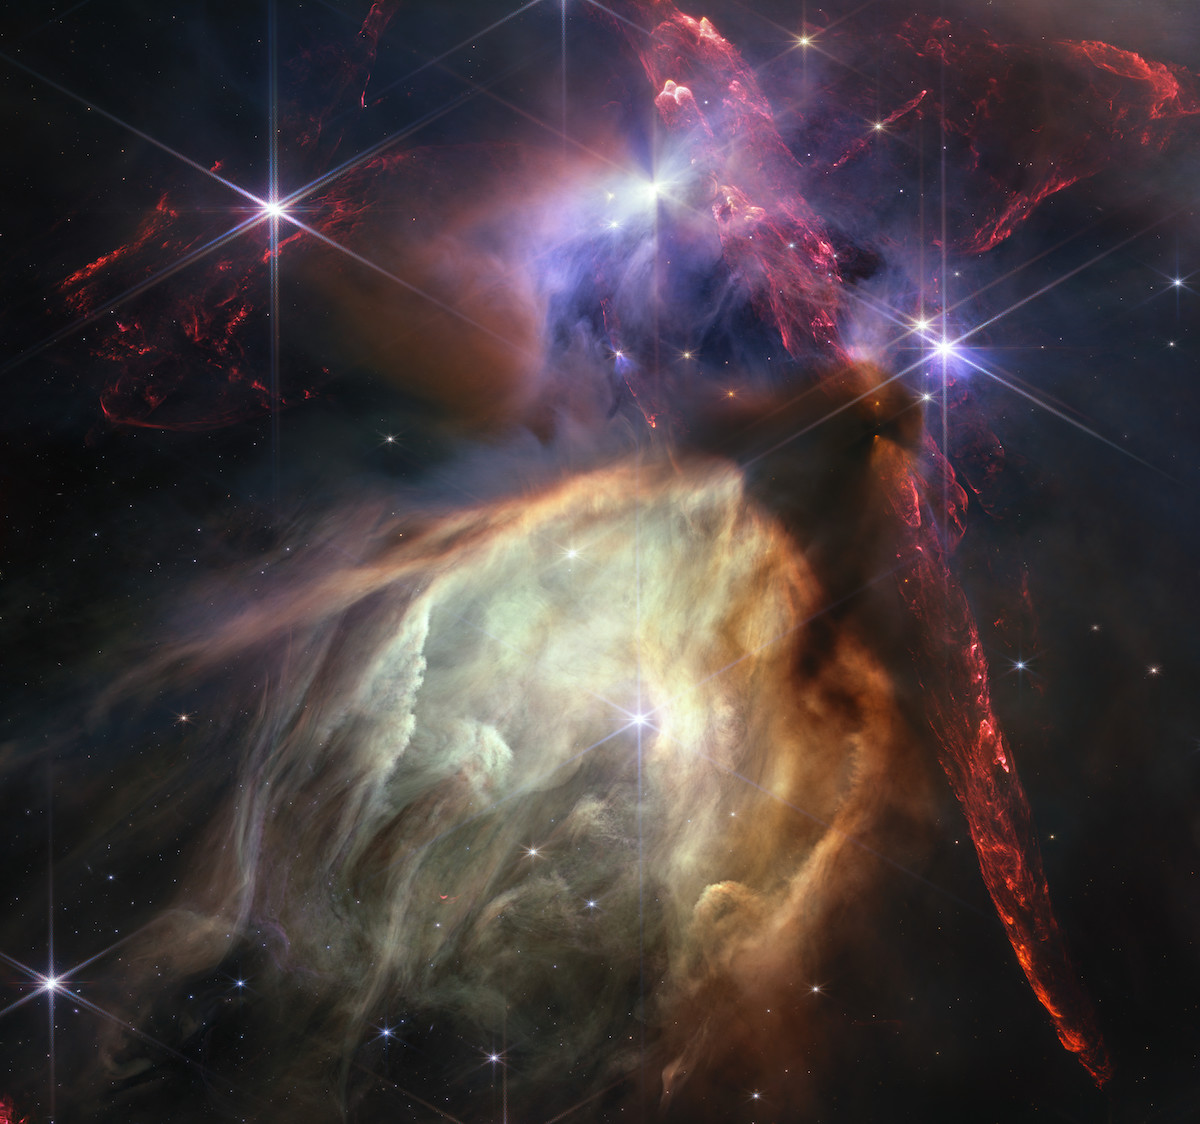 The first anniversary image from the NASA/ESA/CSA James Webb Space Telescope displays star birth like it’s never been seen before, full of detailed, impressionistic texture. The subject is the Rho Ophiuchi cloud complex, the closest star-forming region to Earth. It is a relatively small, quiet stellar nursery, but you’d never know it from Webb’s chaotic close-up. Jets bursting from young stars crisscross the image, impacting the surrounding interstellar gas and lighting up molecular hydrogen, shown in red. Some stars display the telltale shadow of a circumstellar disc, the makings of future planetary systems. The young stars at the centre of many of these discs are similar in mass to the Sun or smaller. The heftiest in this image is the star S1, which appears amid a glowing cave it is carving out with its stellar winds in the lower half of the image. The lighter-coloured gas surrounding S1 consists of polycyclic aromatic hydrocarbons, a family of carbon-based molecules that are among the most common compounds found in space. [Image description: Red dual opposing jets coming from young stars fill the darker top half of the image, while a glowing pale-yellow, cave-like structure is bottom centre, tilted toward two o’clock, with a bright star at its centre. The dust of the cave structure becomes wispy toward eight o’clock. Above the arched top of the dust cave three groupings of stars with diffraction spikes are arranged. A dark cloud sits at the top of the arch of the glowing dust cave, with one streamer curling down the right-hand side. The dark shadow of the cloud appears pinched in the centre, with light emerging in a triangle shape above and below the pinch, revealing the presence of a star inside the dark cloud. The image’s largest jets of red material emanate from within this dark cloud, thick and displaying structure like the rough face of a cliff, glowing brighter at the edges. At the top centre of the image, a star displays another, larger pinched dark shadow, this time vertically. To the left of this star is a more wispy, indistinct region.]